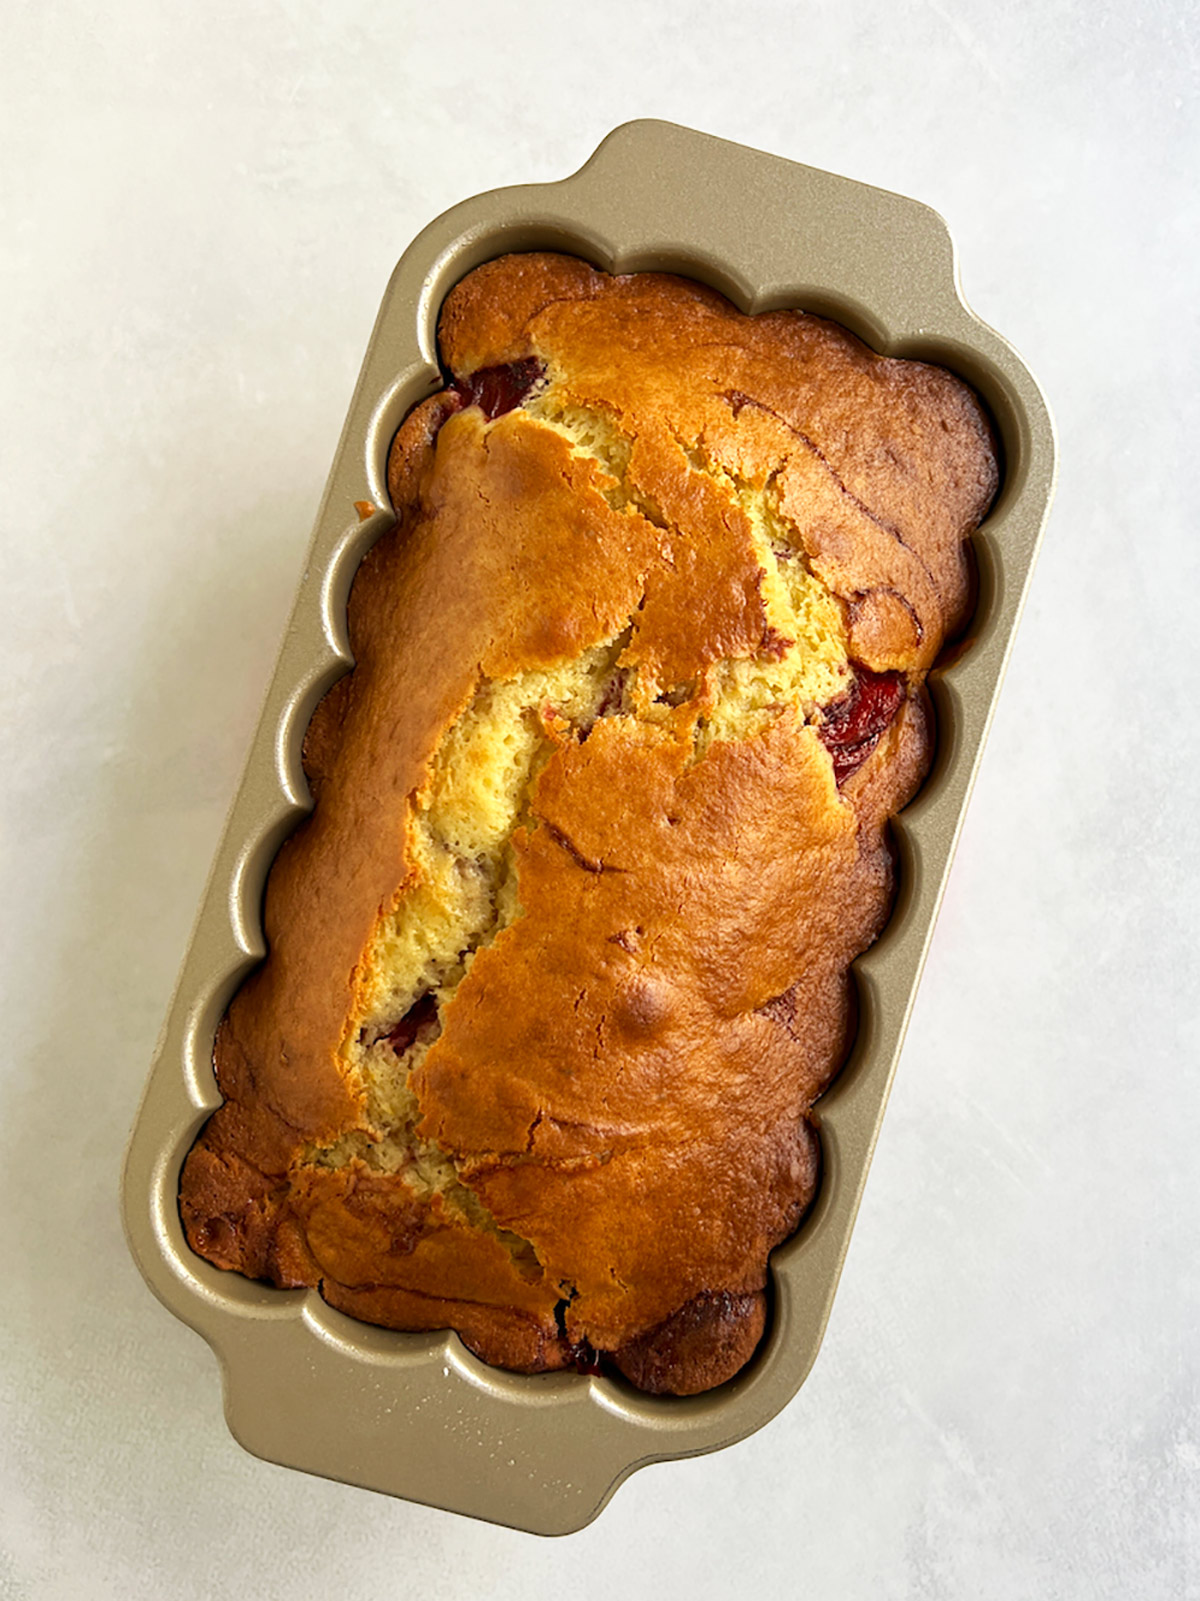 Strawberry shortcake loaf baked in pan.